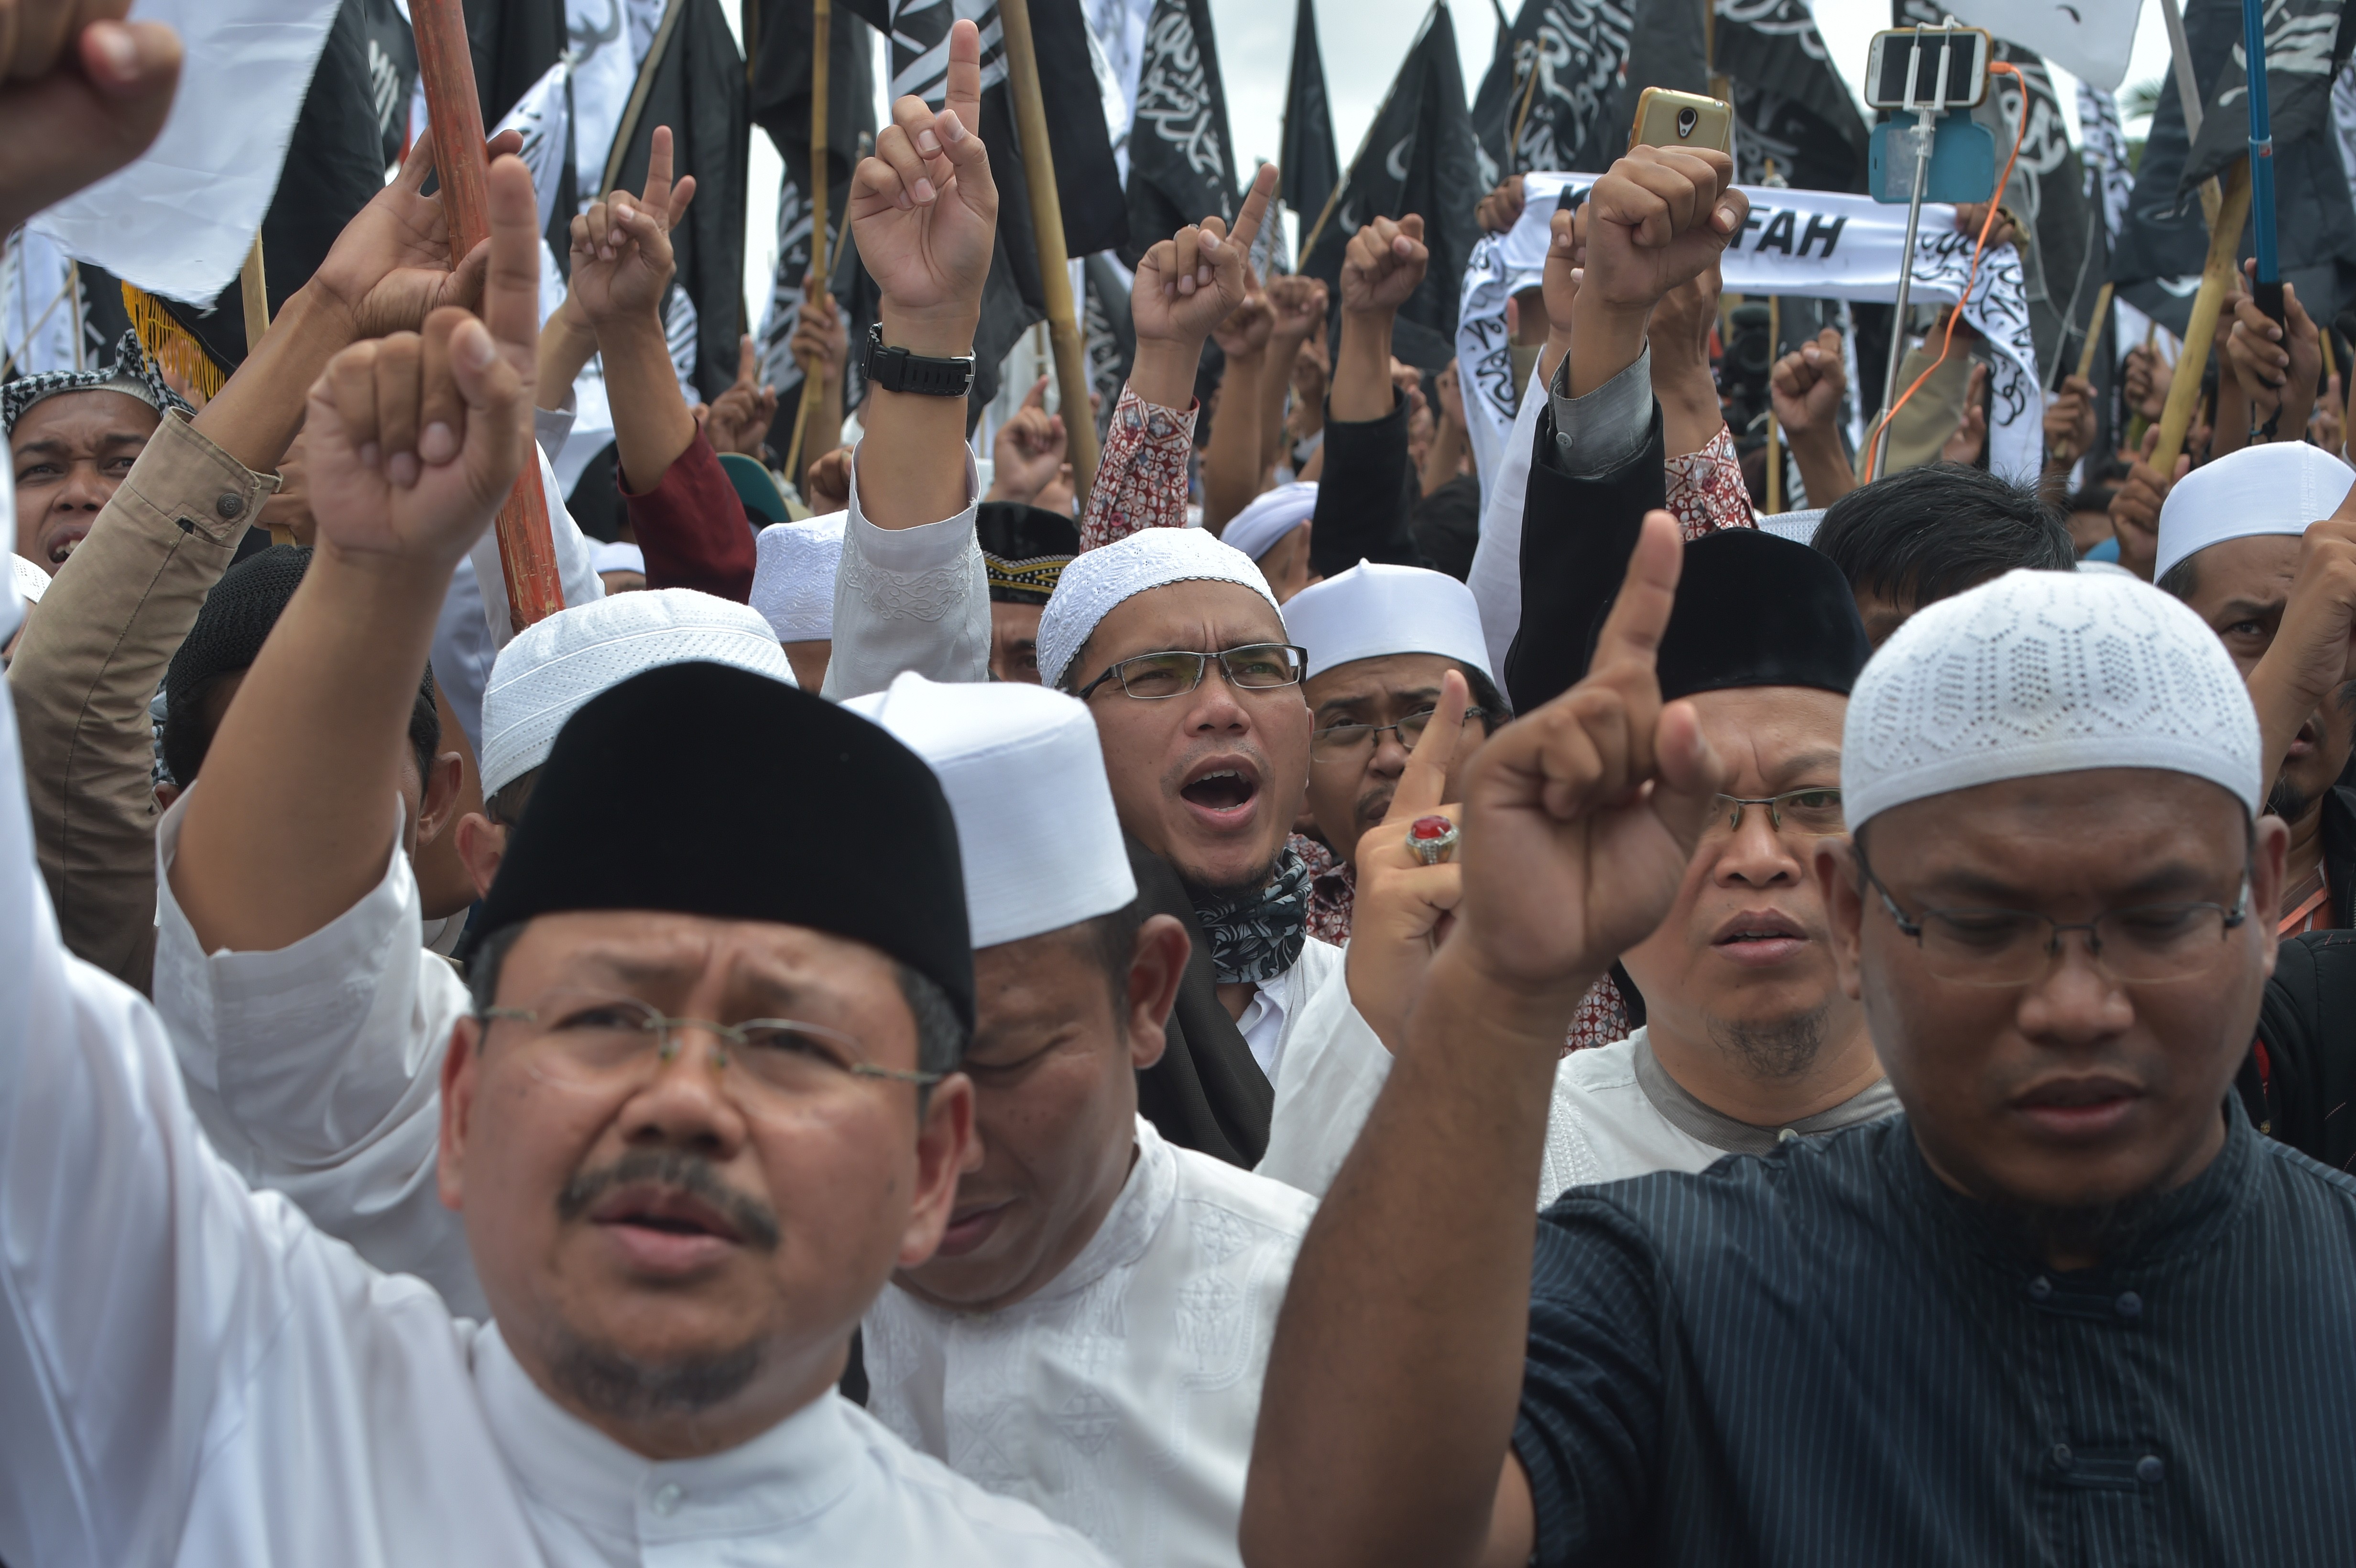 Indonesian Muslims shout slogans at the National Monument in Jakarta on February 5, 2017, during a rally to support the country’s clerics, including Rizieq Shihab, leader of the Front Pembela Islam, who helped organise mass protests against Jakarta governor and ethnic Chinese Christian Basuki Tjahaja Purnama for allegedly insulting Islam. Photo: AFP